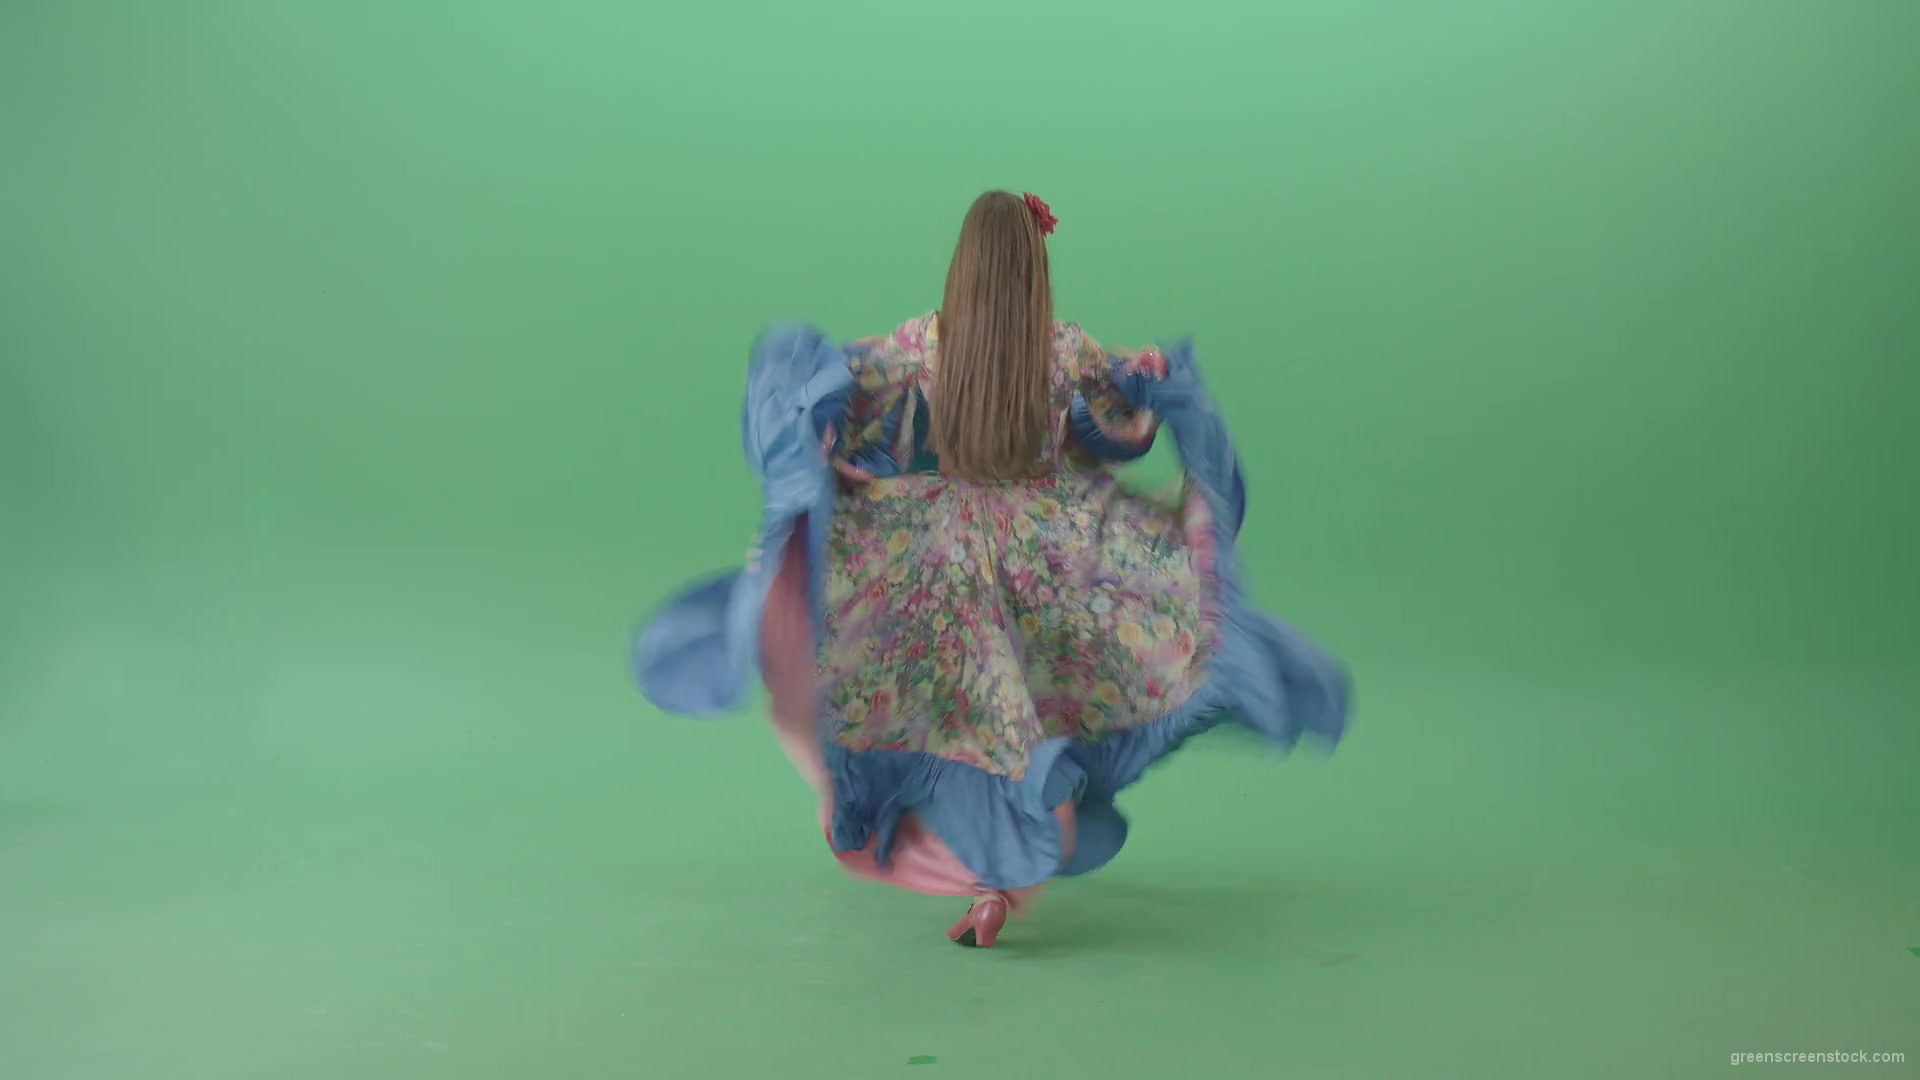 Dancing-gipsy-girl-waving-balkan-dress-from-back-view-isolated-on-green-screen-4K-Video-Stock-Footage-1920_008 Green Screen Stock